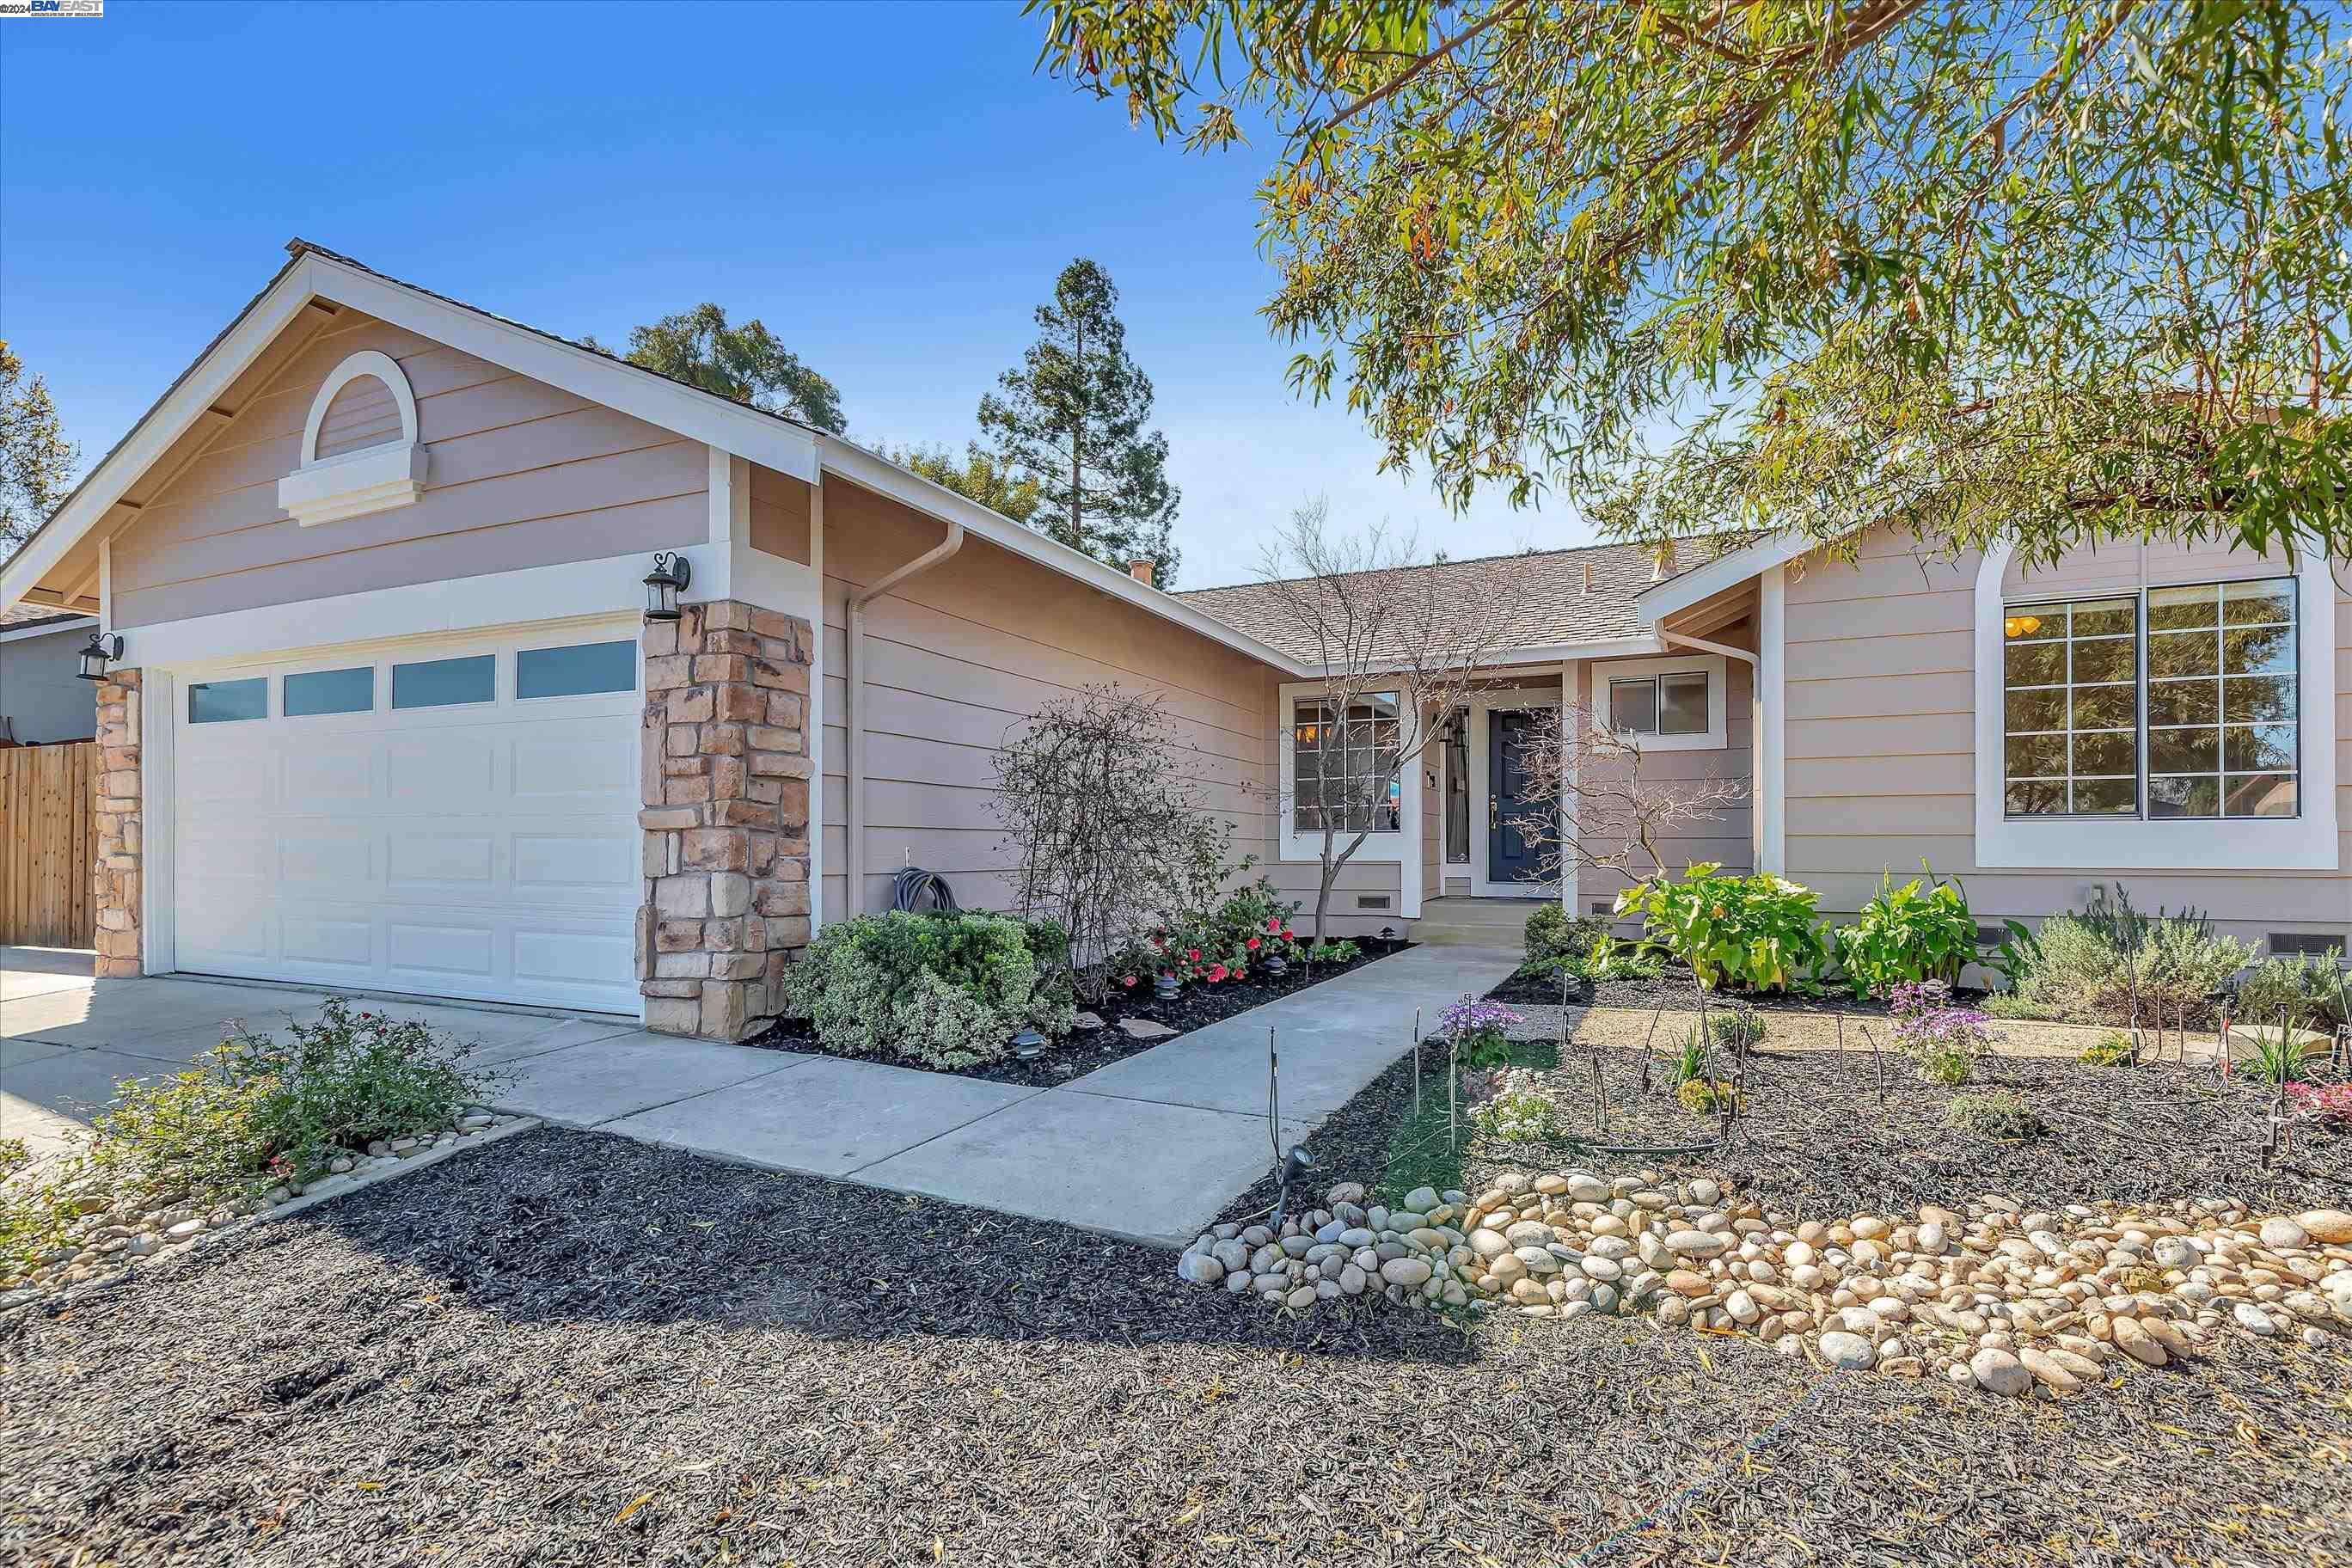 Detail Gallery Image 1 of 1 For 5035 Erica Way, Livermore,  CA 94550-7205 - 3 Beds | 2 Baths